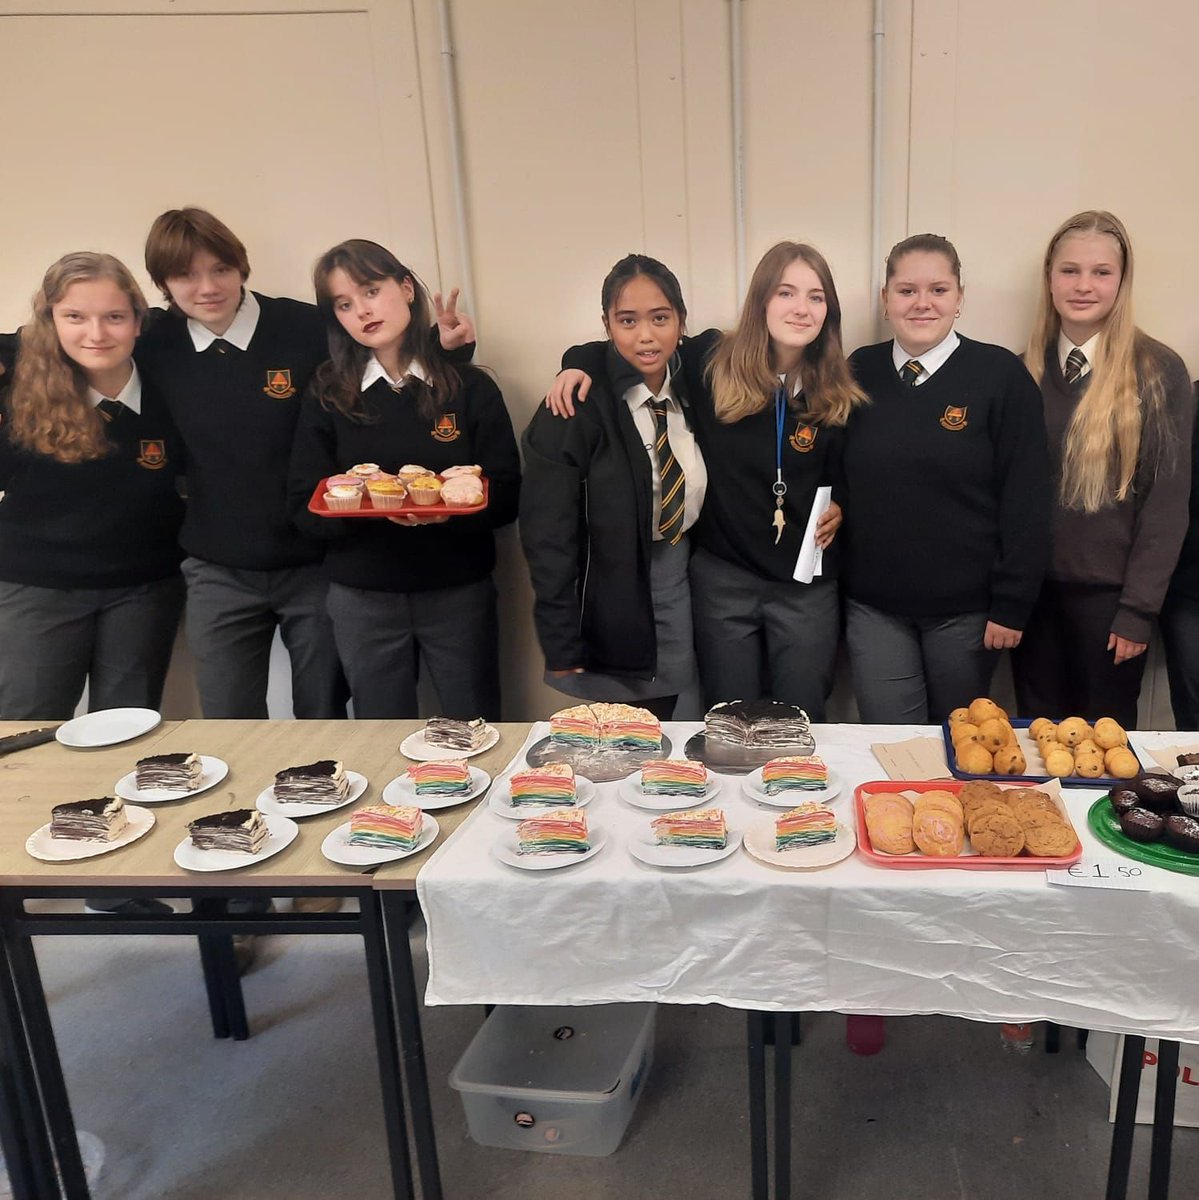 A massive well done to the @stpatscork TY students who raised €311 from their cake sale. This money will be donated to the Marymount Hospice. Marymount will be the TYs chosen charity partner for the year. They already have more ideas for fundraising! @marymounthospice